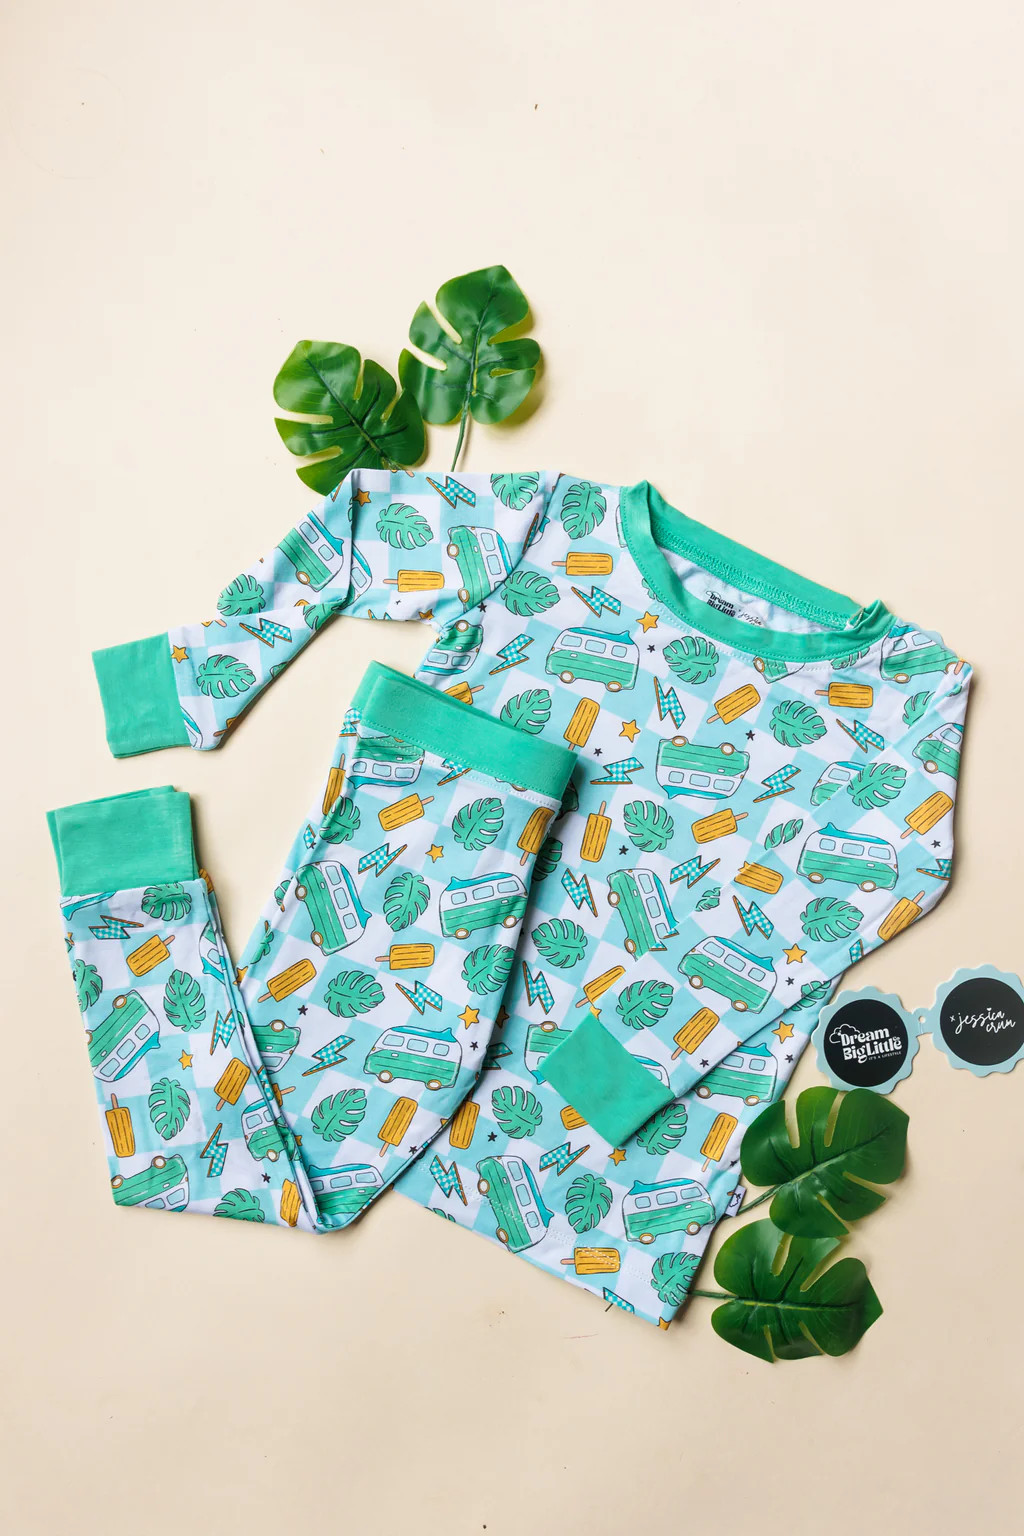 EXCLUSIVE CHECKED OUT FOR SUMMER DREAM SET | DREAM BIG LITTLE CO